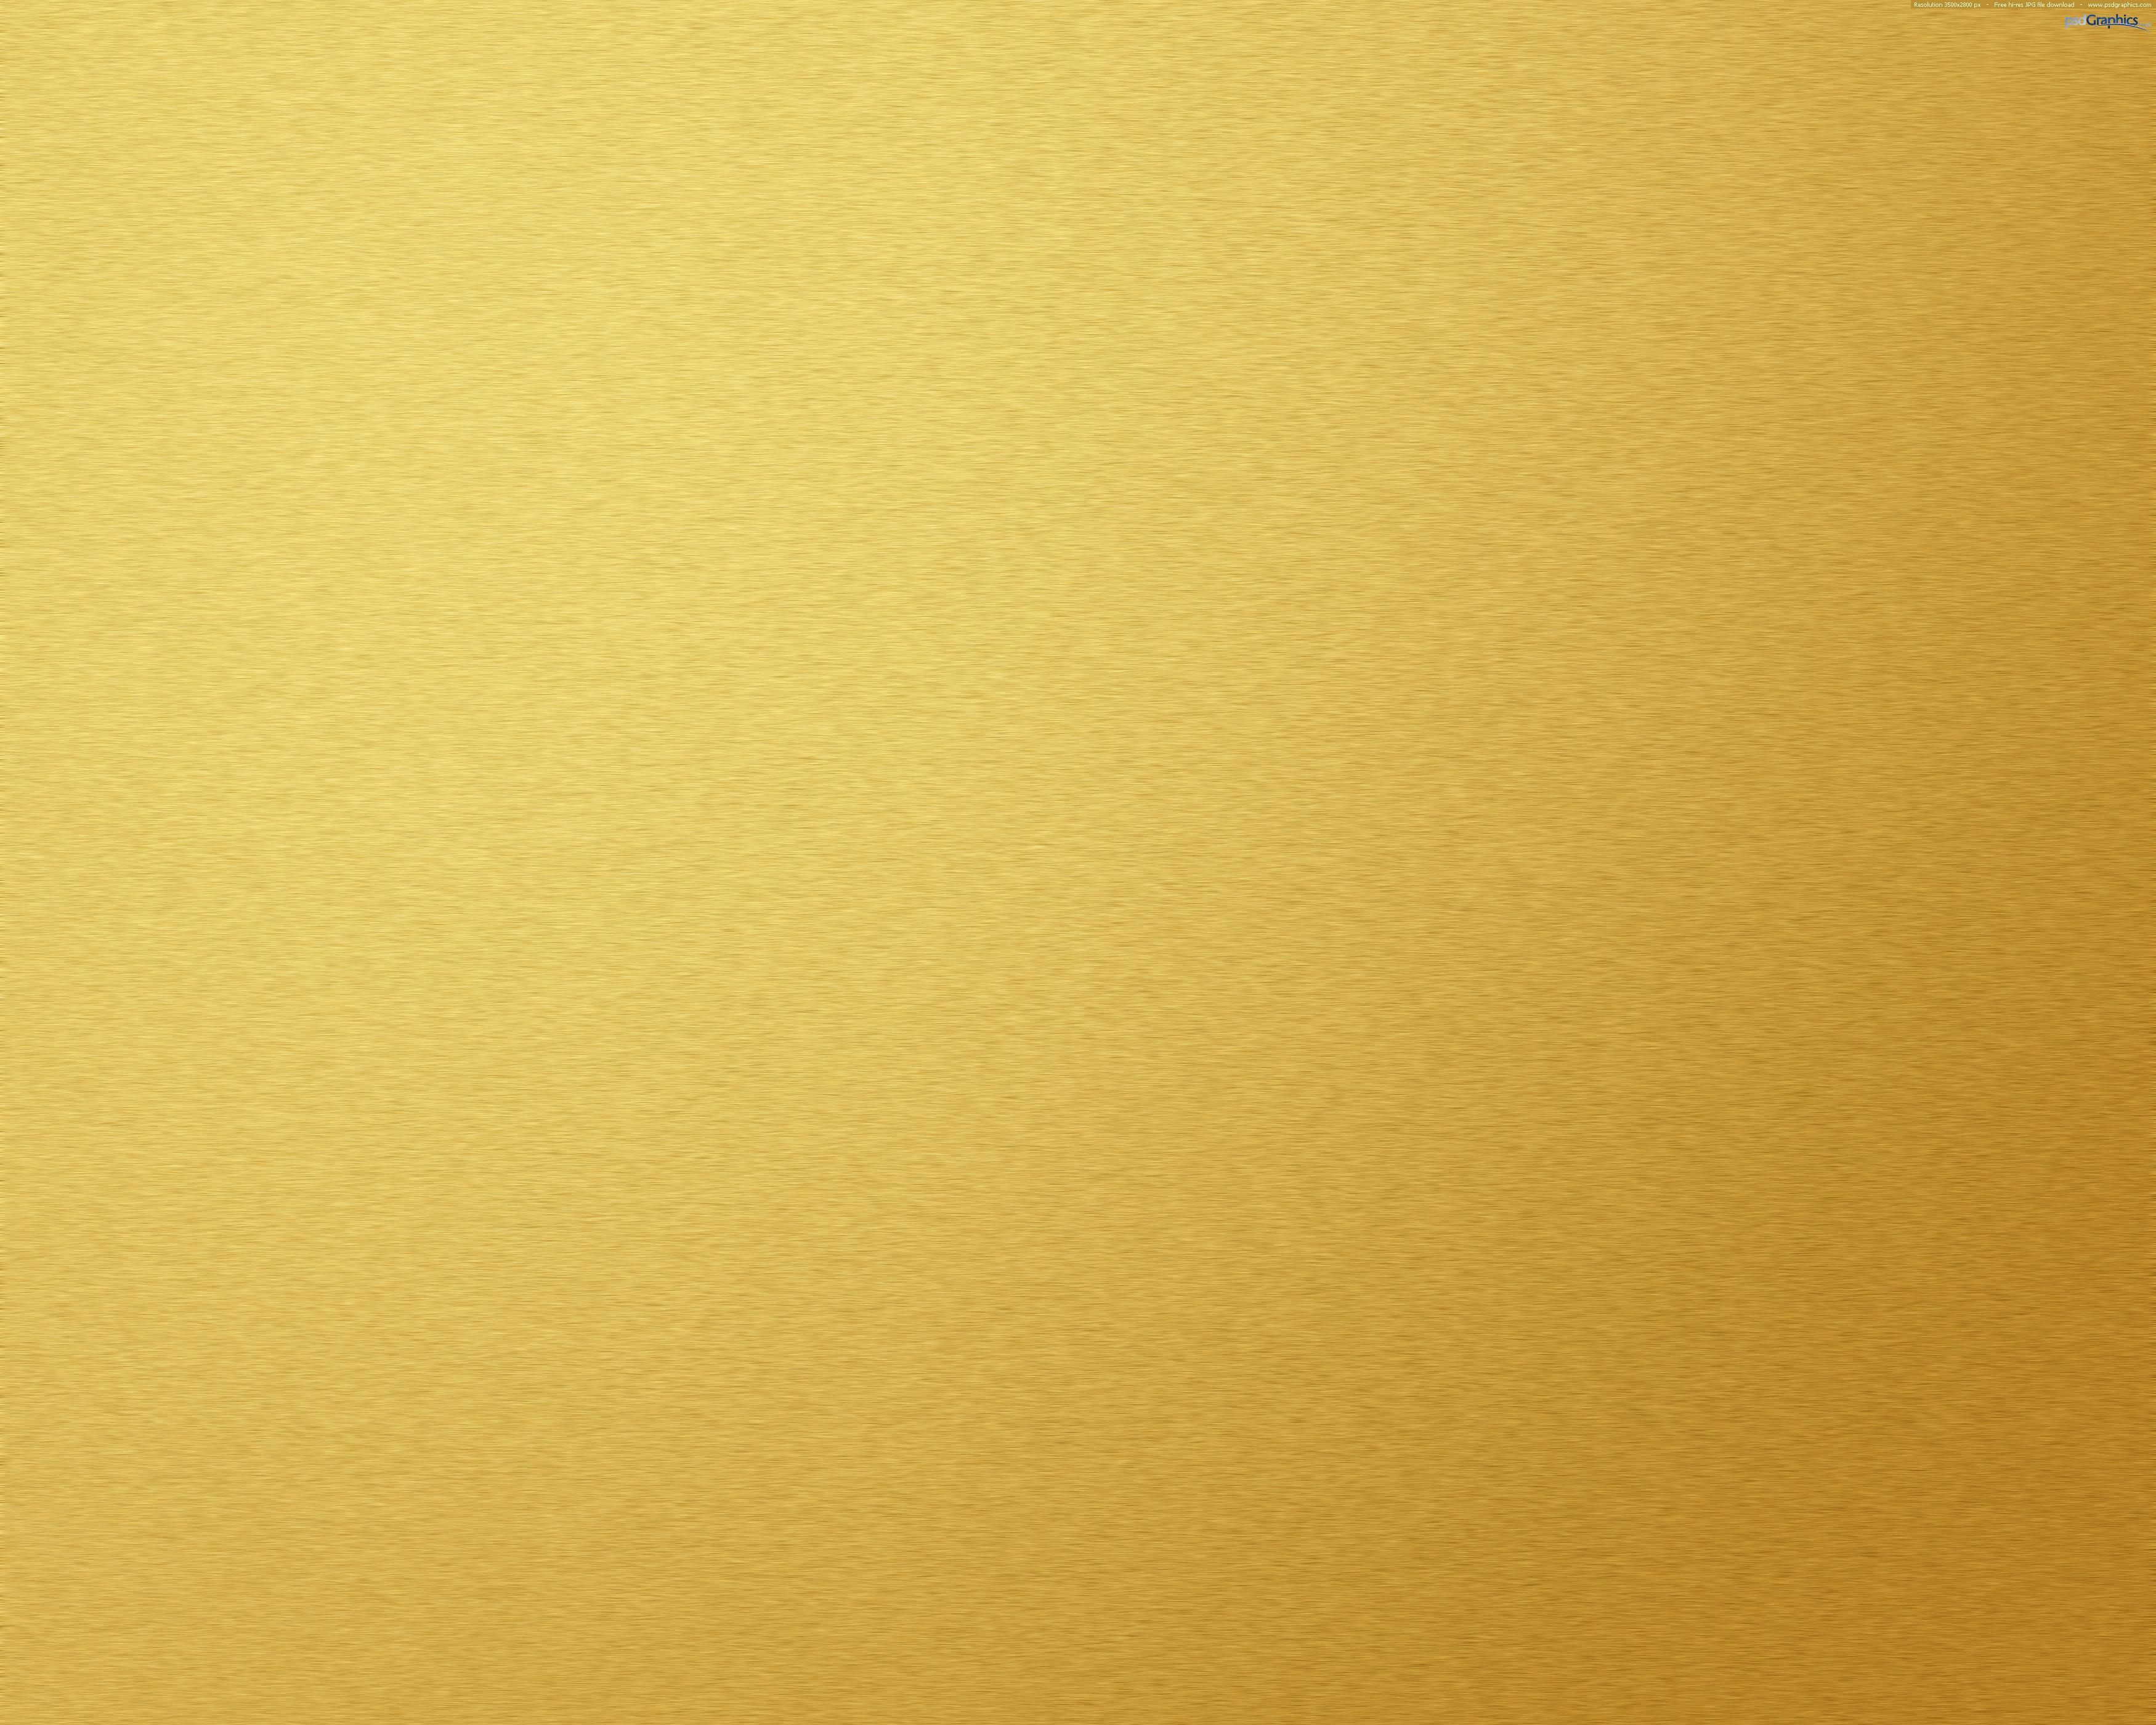 Gold Foil Background Background for Free